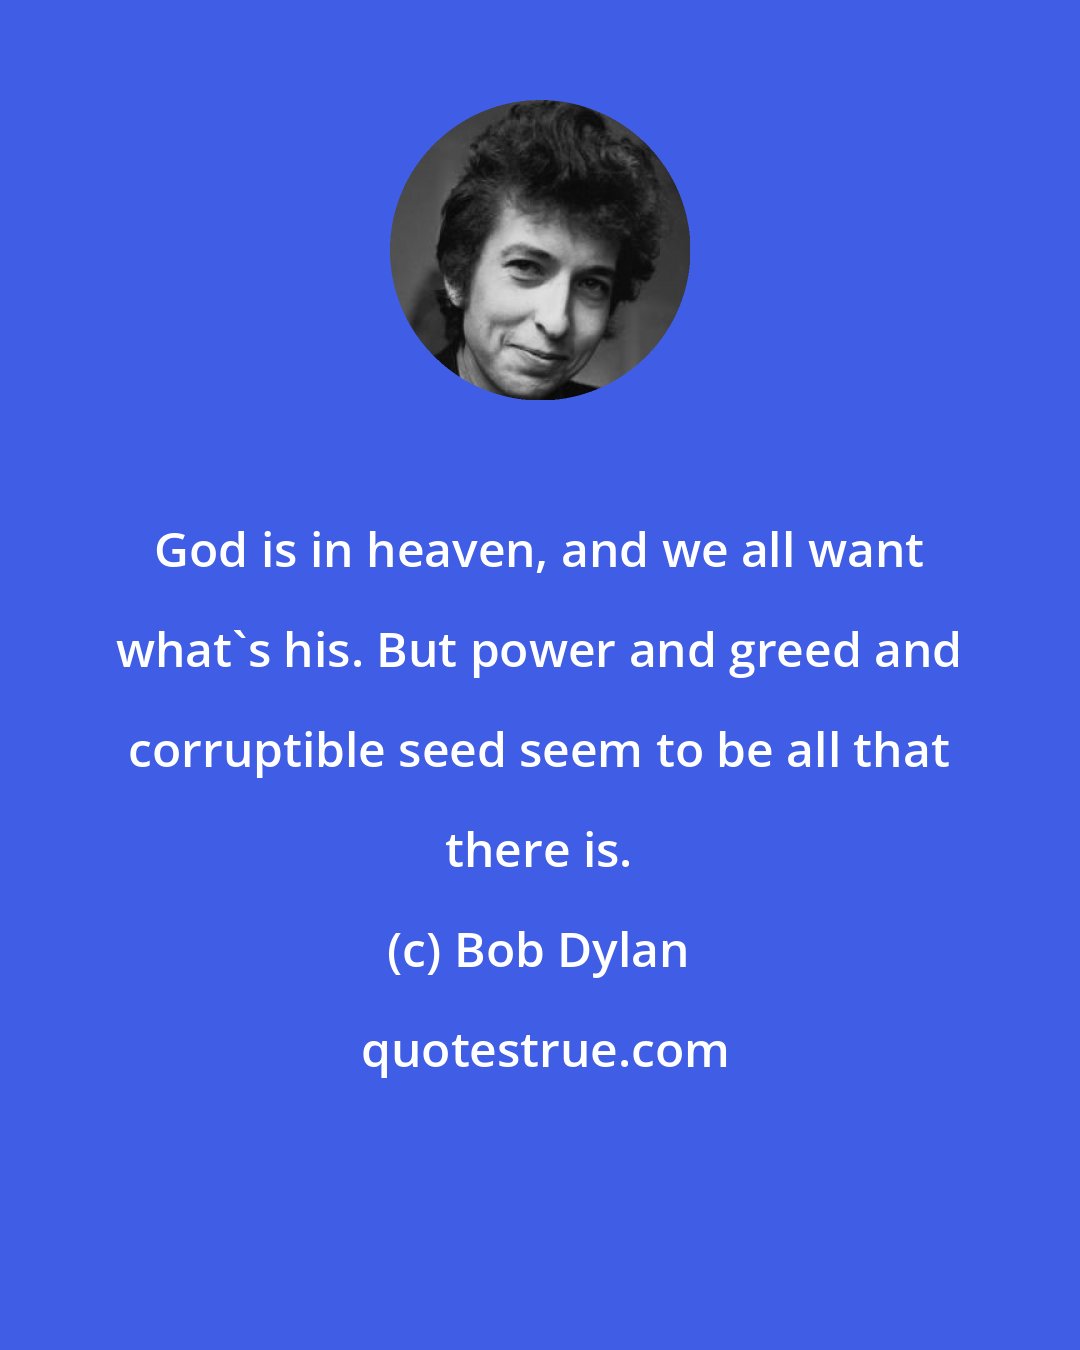 Bob Dylan: God is in heaven, and we all want what's his. But power and greed and corruptible seed seem to be all that there is.